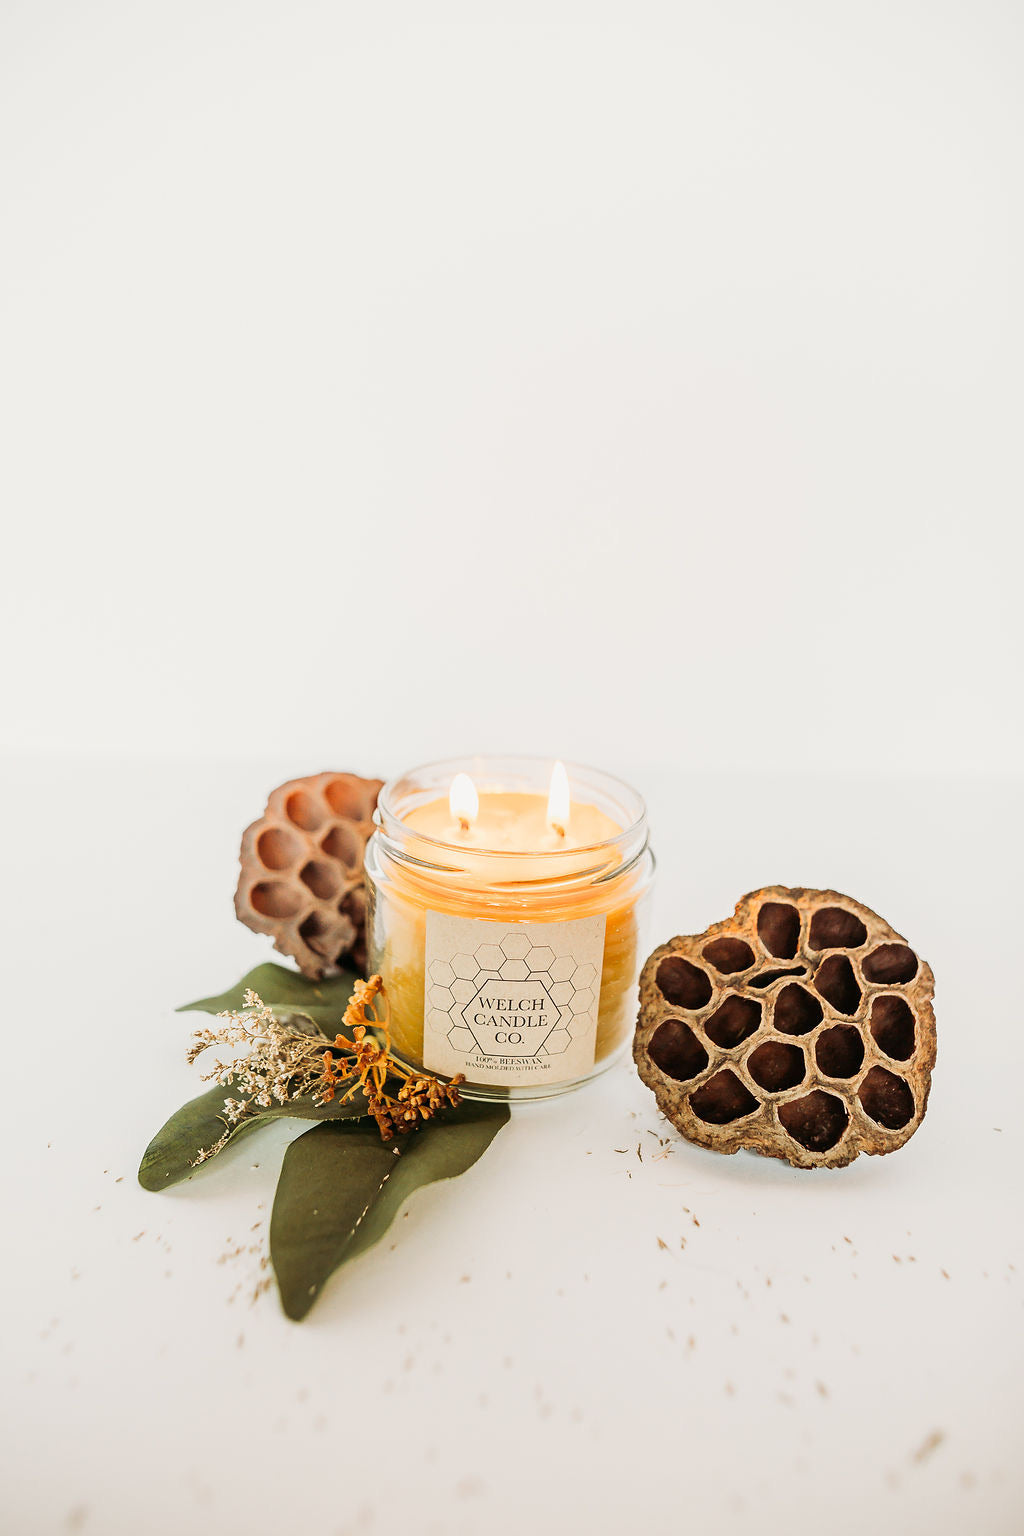 12 oz Beeswax Candle – Welch Candle Company